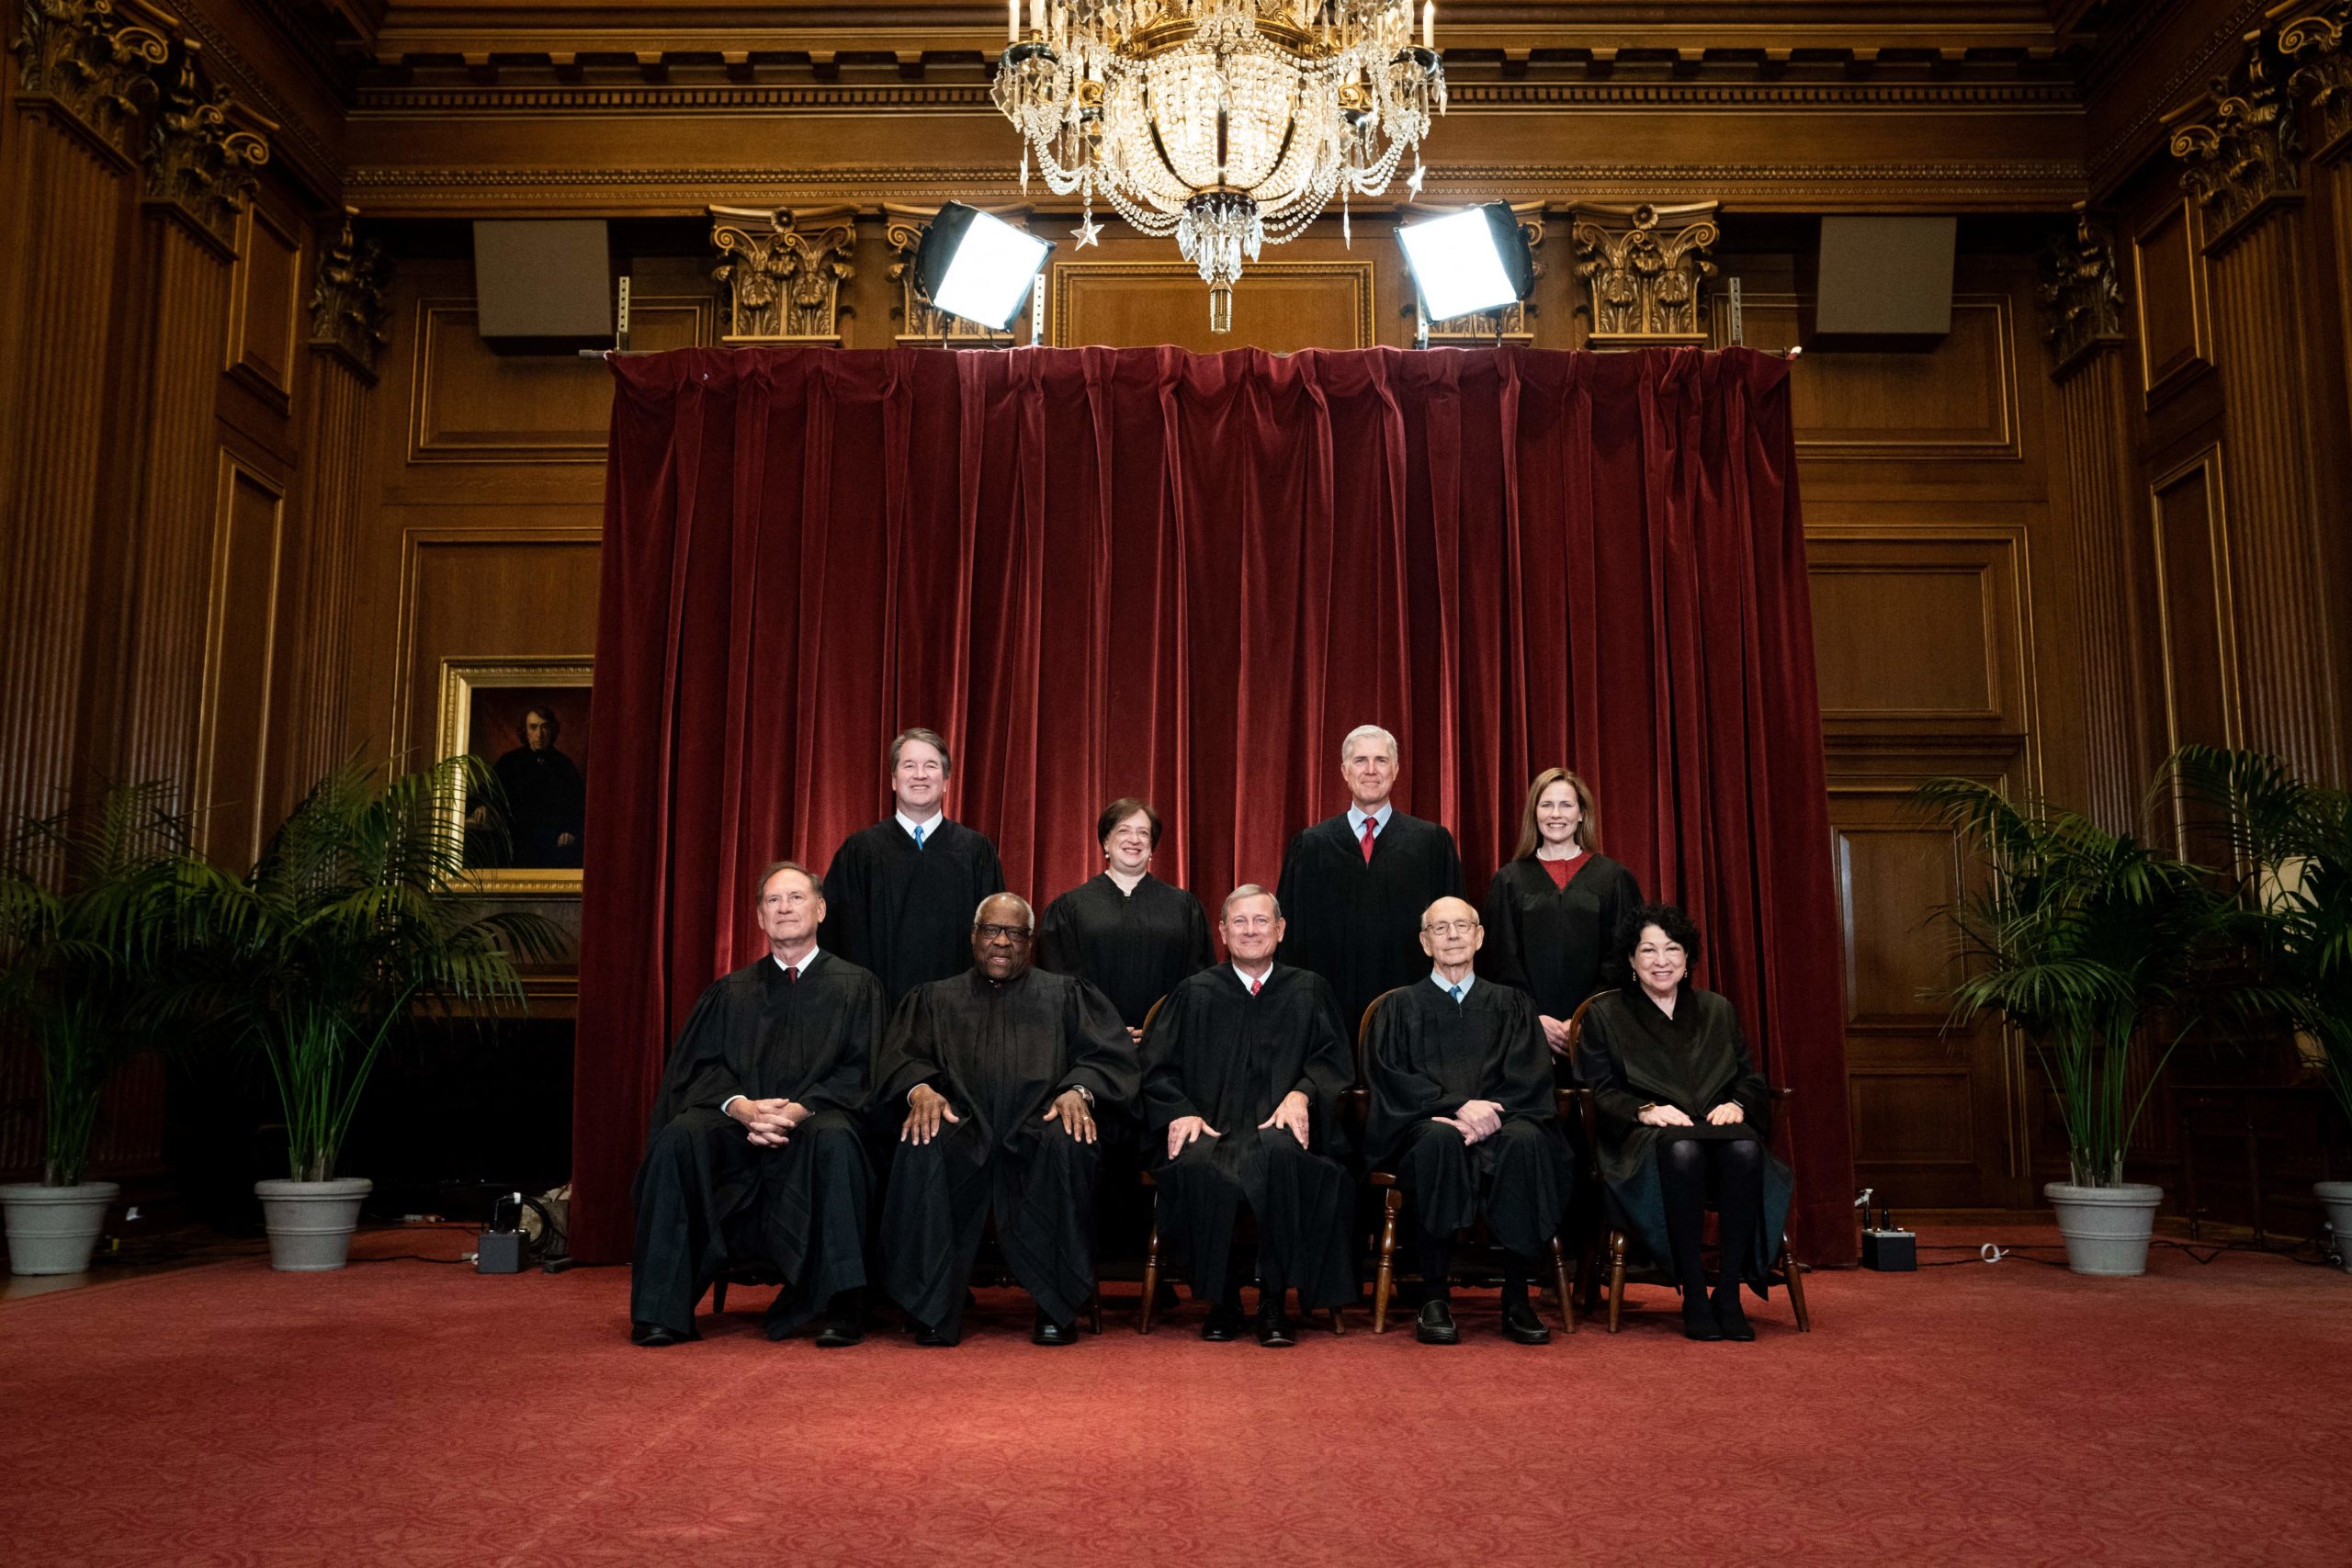 Seated from left: Associate Justice Samuel Alito, Associate Justice Clarence Thomas, Chief Justice John Roberts, Associate Justice Stephen Breyer and Associate Justice Sonia Sotomayor, standing from left: Associate Justice Brett Kavanaugh, Associate Justice Elena Kagan, Associate Justice Neil Gorsuch and Associate Justice Amy Coney Barrett pose during a group photo of the Justices at the Supreme Court in Washington, DC on April 23, 2021. (Photo by ERIN SCHAFF/POOL/AFP via Getty Images)